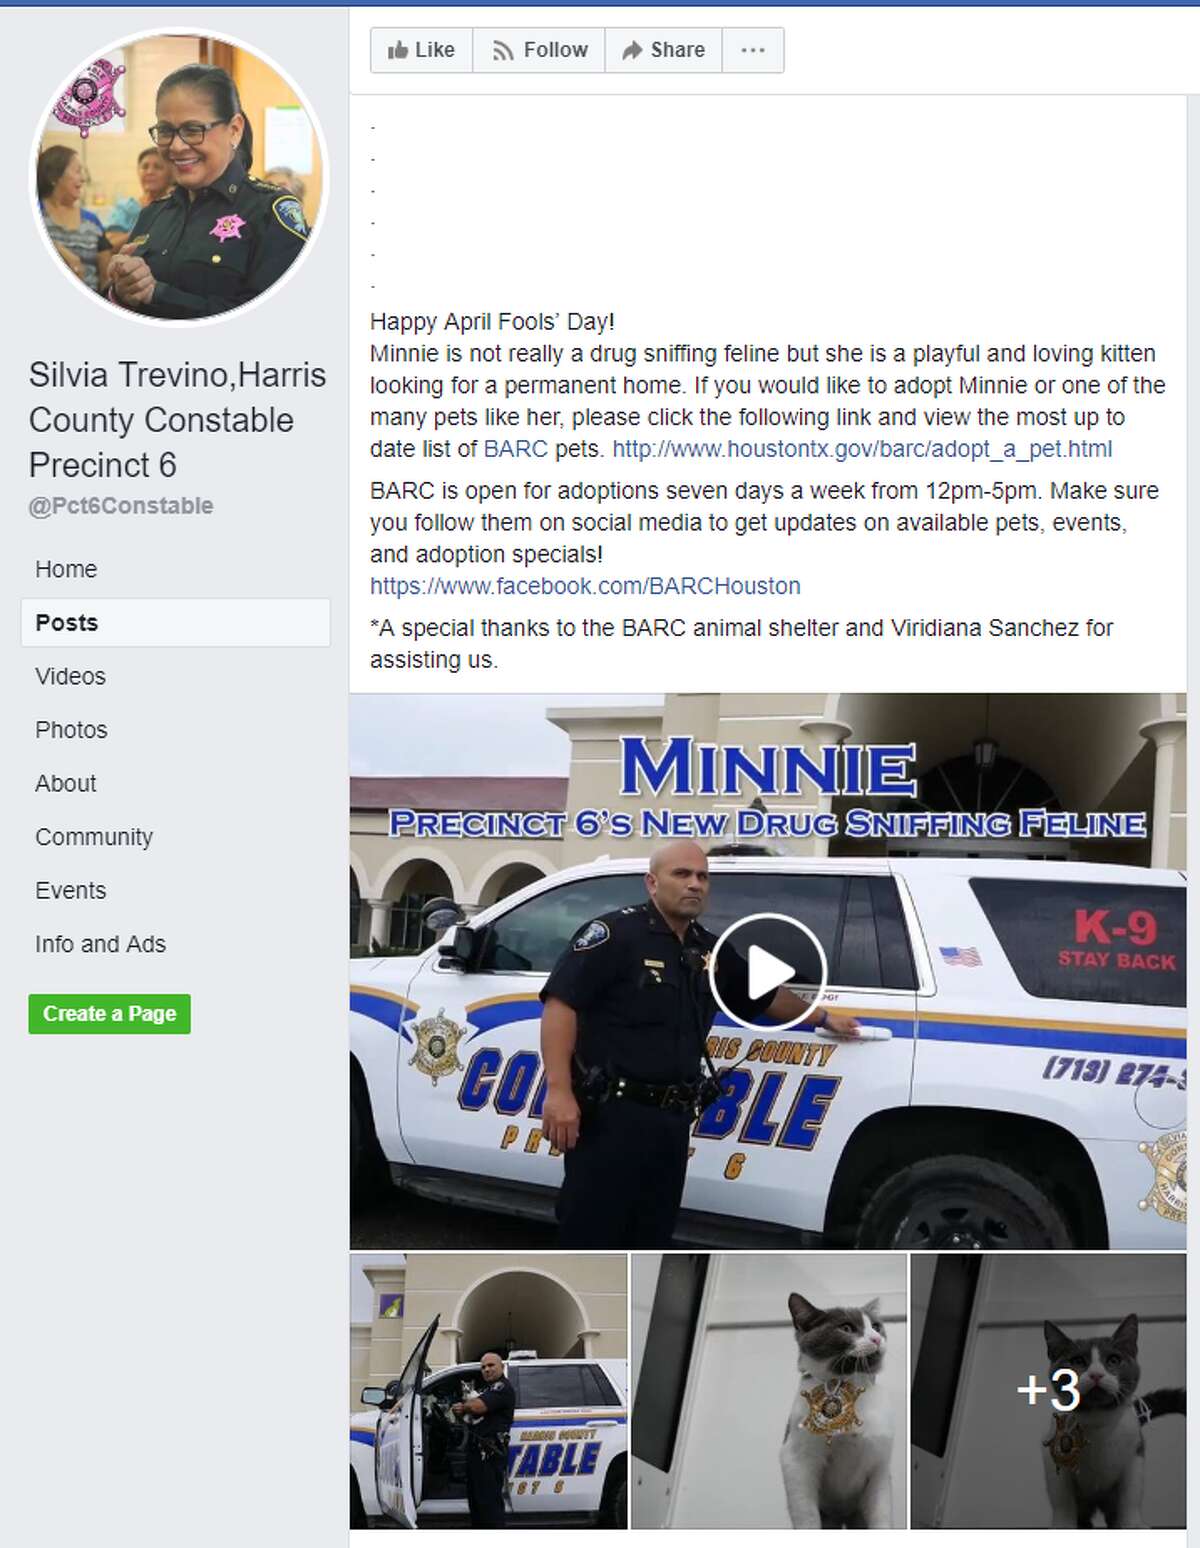 Harris County Constable Precinct 6 posted on Facebook  "Due to the success of our drug detection K9 Ka’ro, Precinct 6 has decided to add a drug-sniffing feline to our team. “Minnie” will be the first drug-sniffing feline to work for a Harris County Law Enforcement agency and we couldn’t be more honored to have her." 